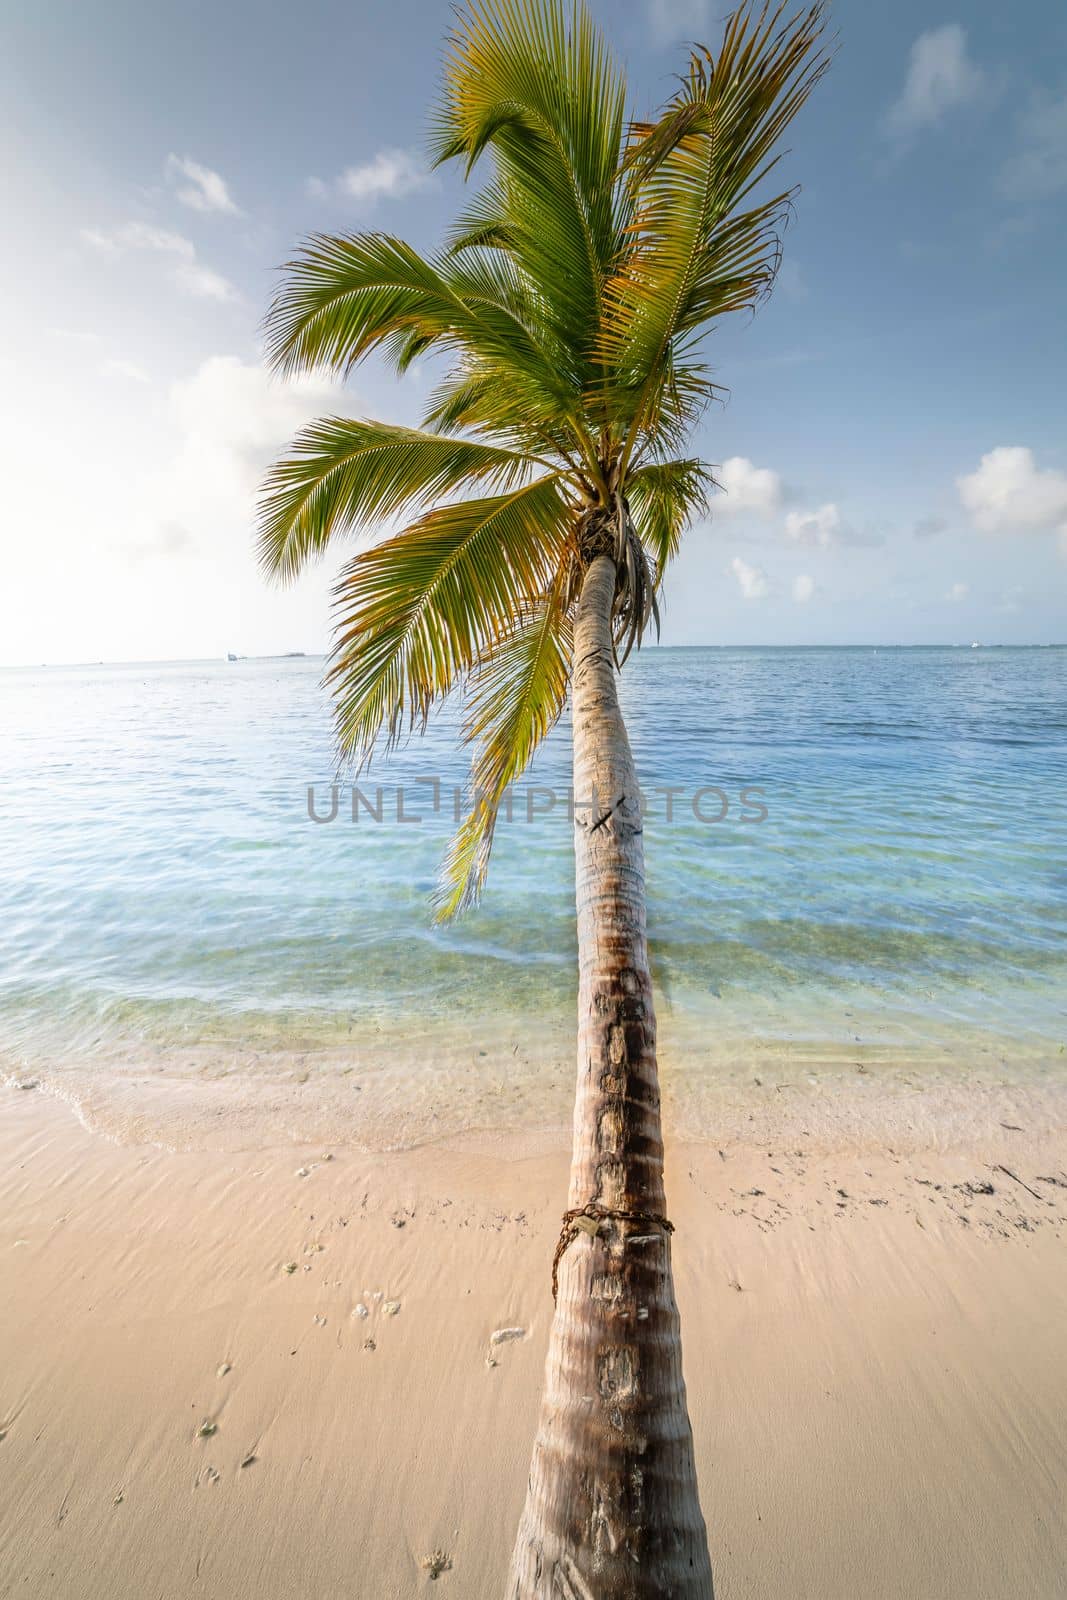 Palm tree and Tropical idyllic and secluded beach in Punta Cana, turquoise caribbean sea